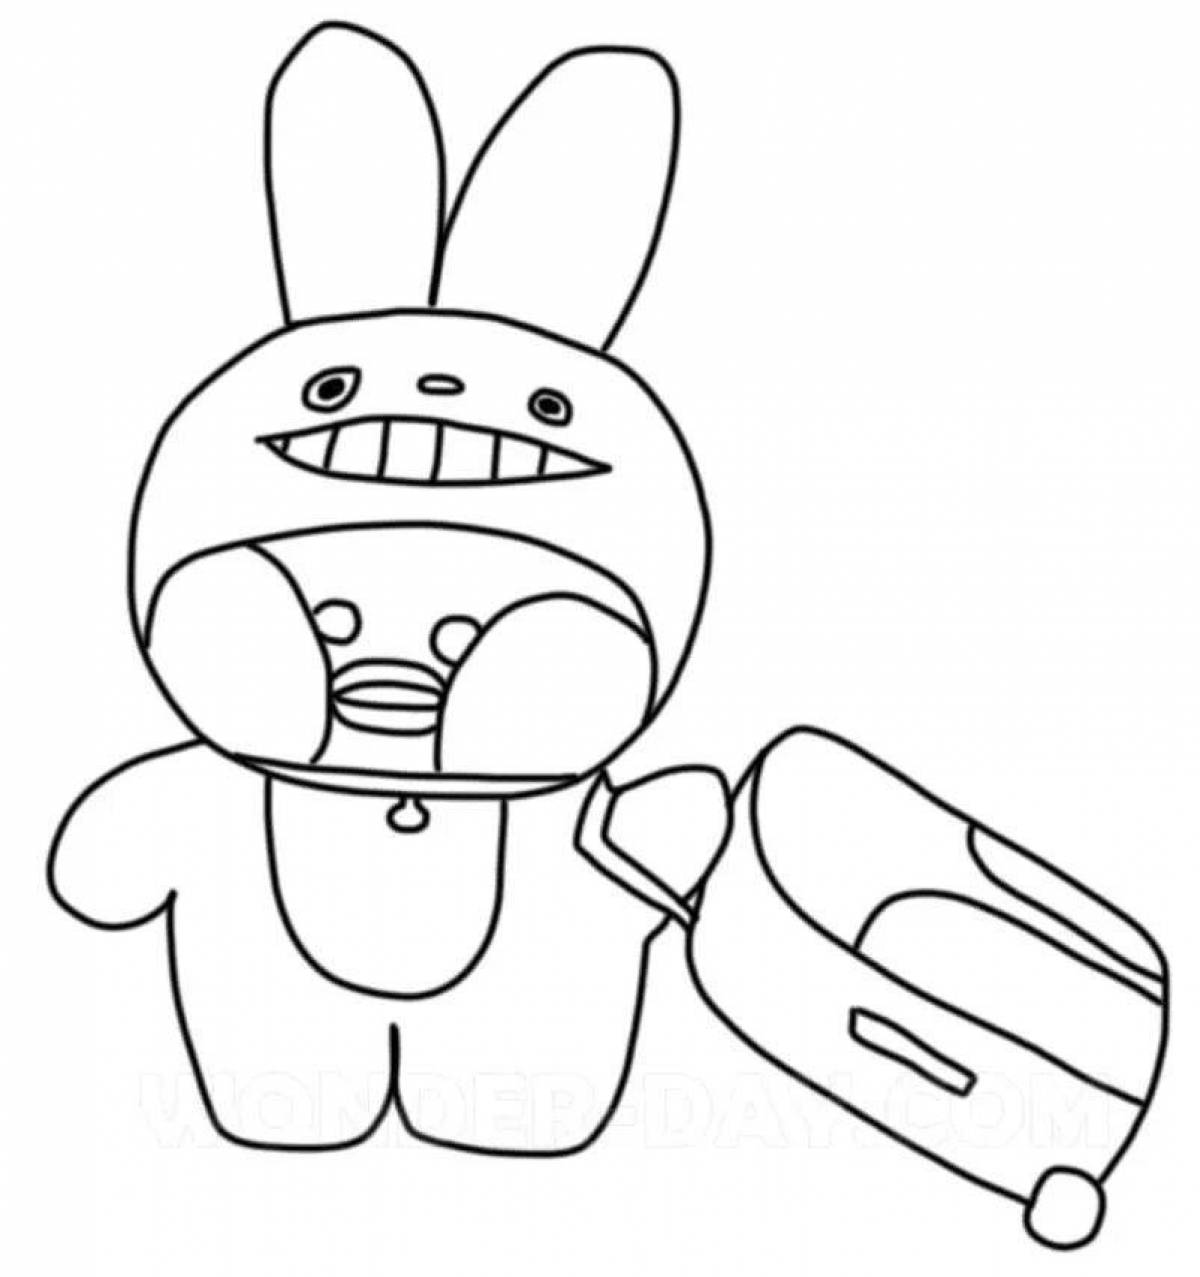 Animated little duck coloring page - lalafanfan